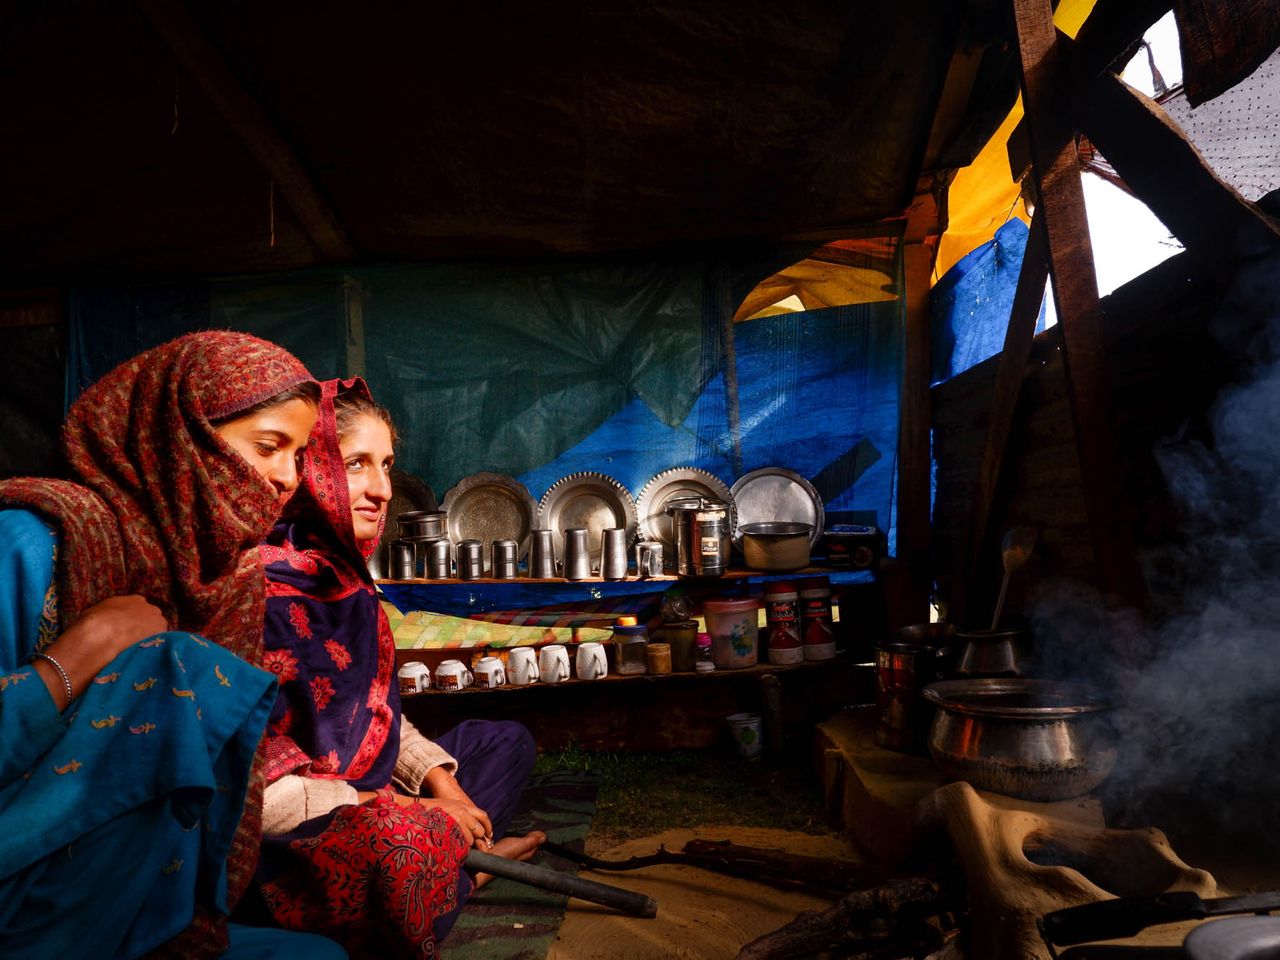 Kausar, 16 (left), and Rukhsana, 18, in their tent in Chandipora. “Cooking, fetching water and just gossiping makes our day fun.” Date: 9 May, 2022.